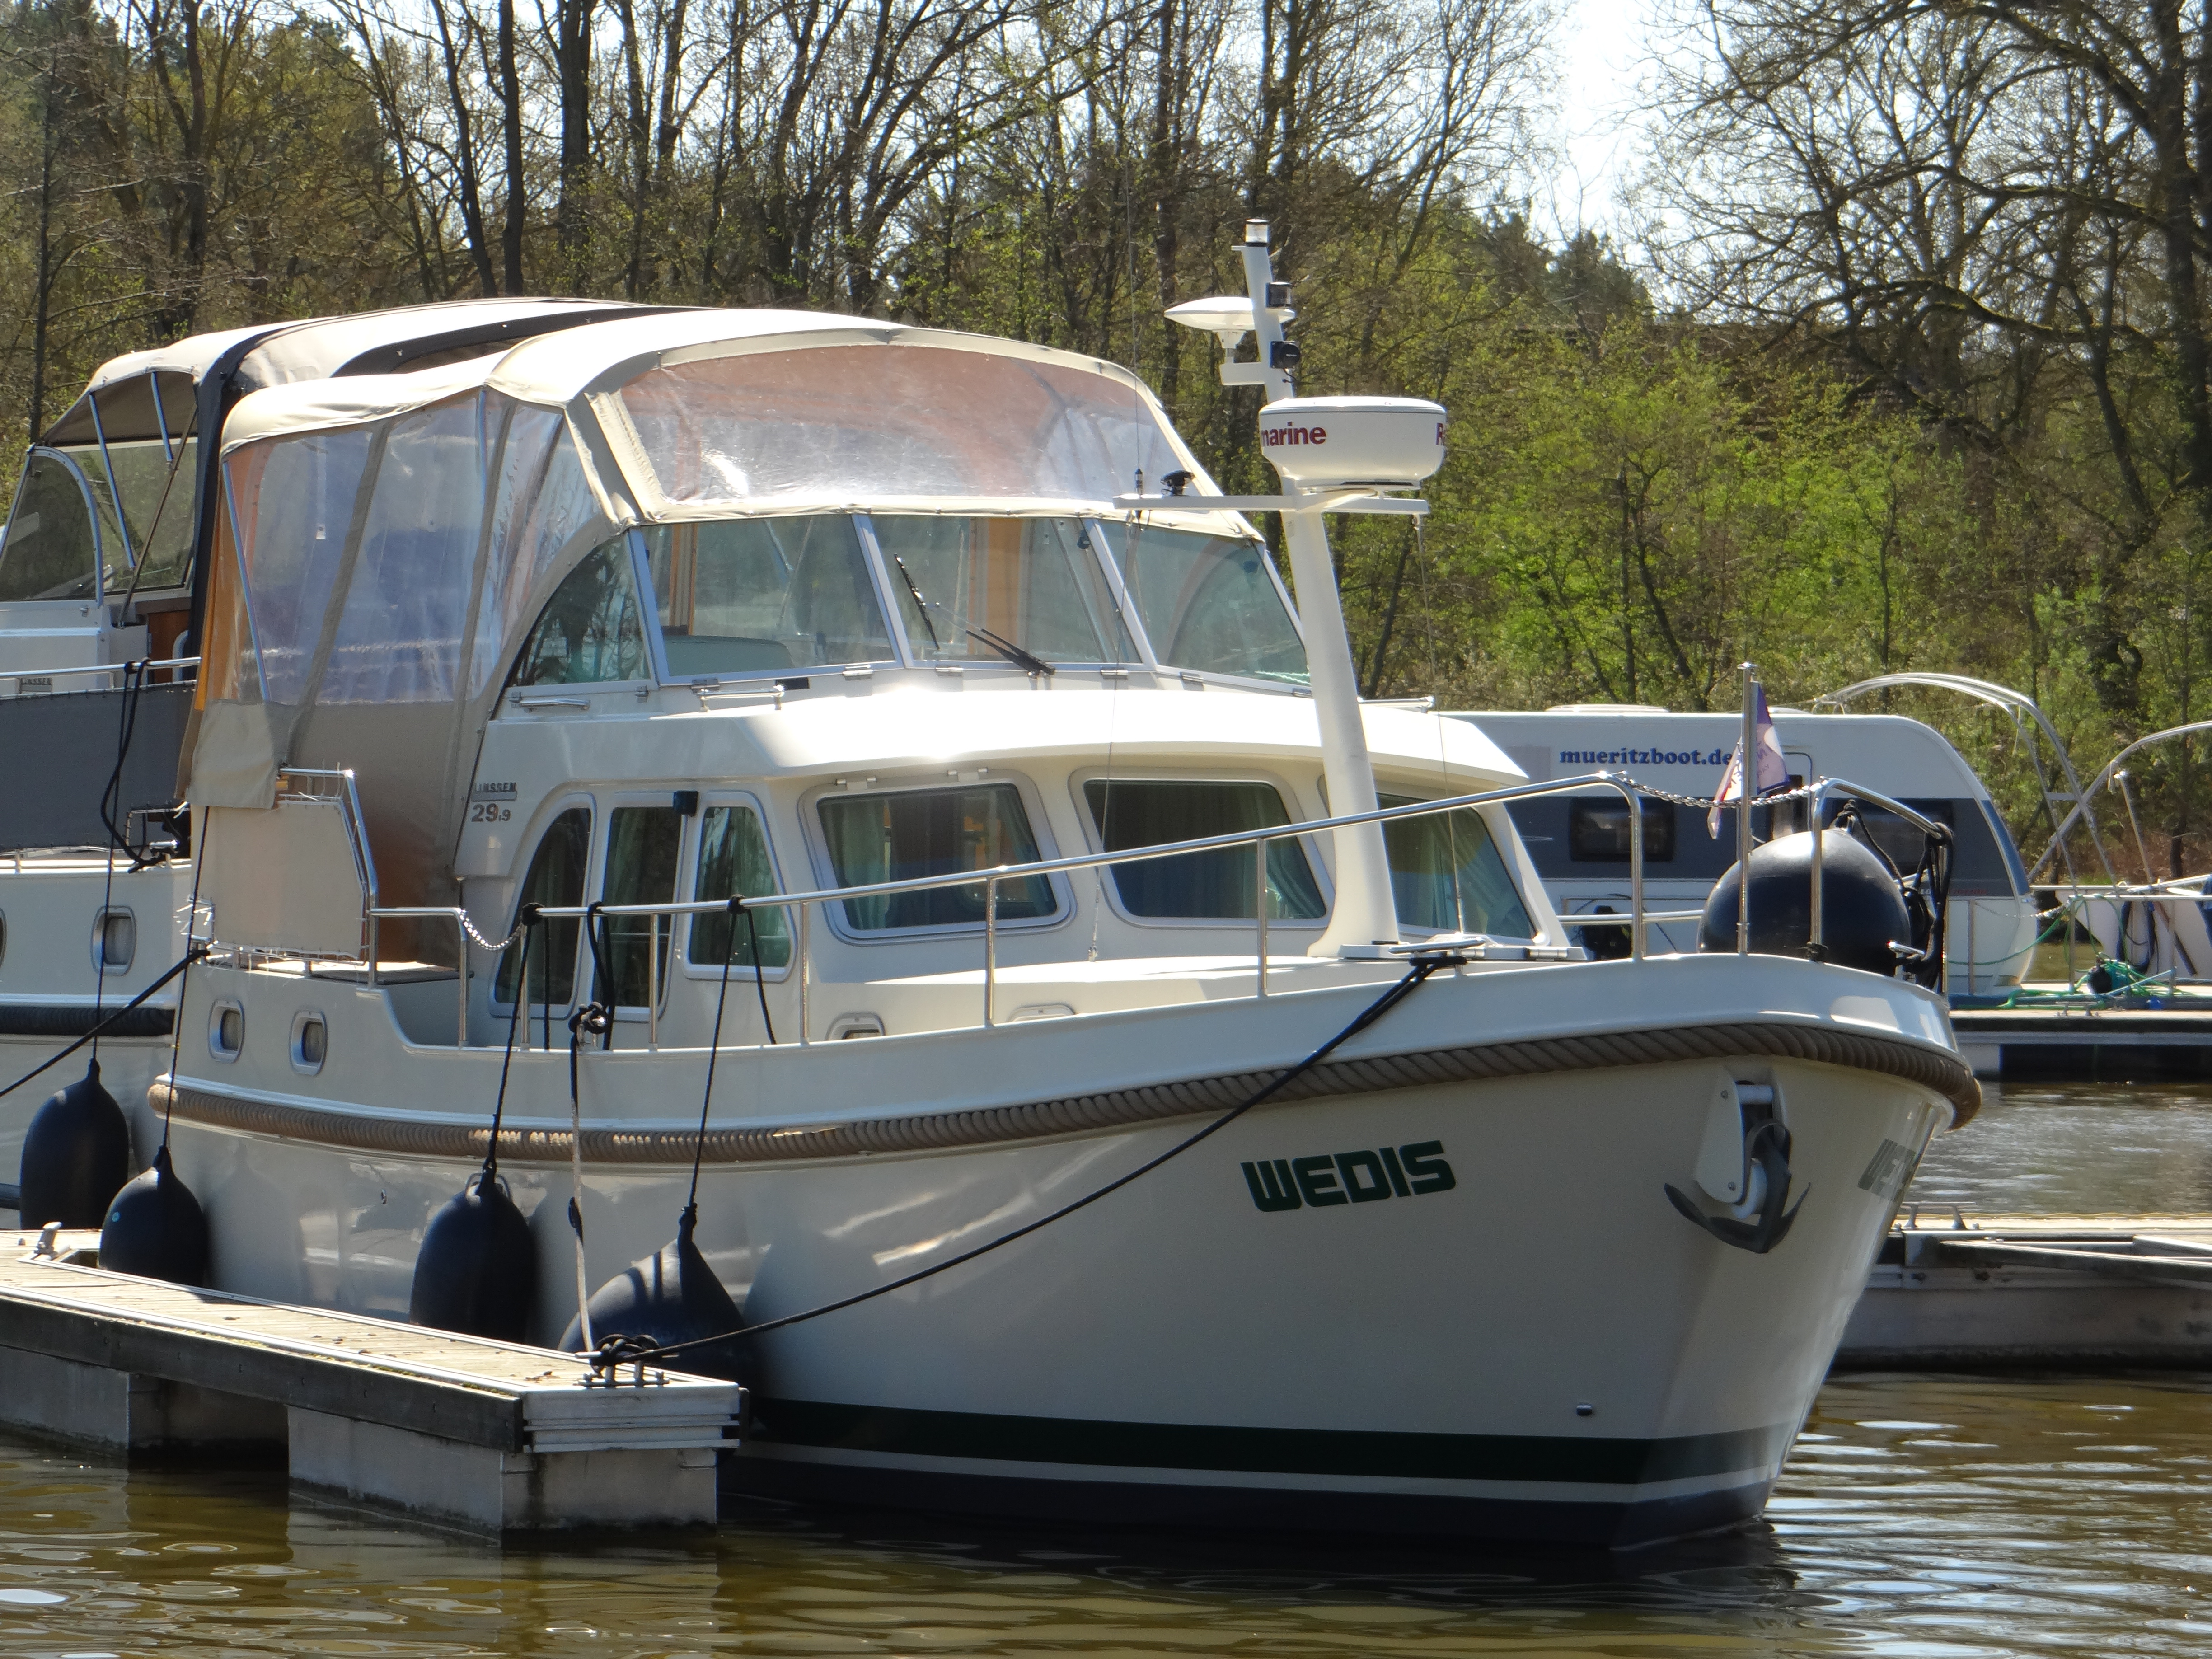 Linssen Grand Sturdy 29.9 AC - Yacht Charter Germany & Boat hire in Germany Mirow Jachthafen Mirow 2